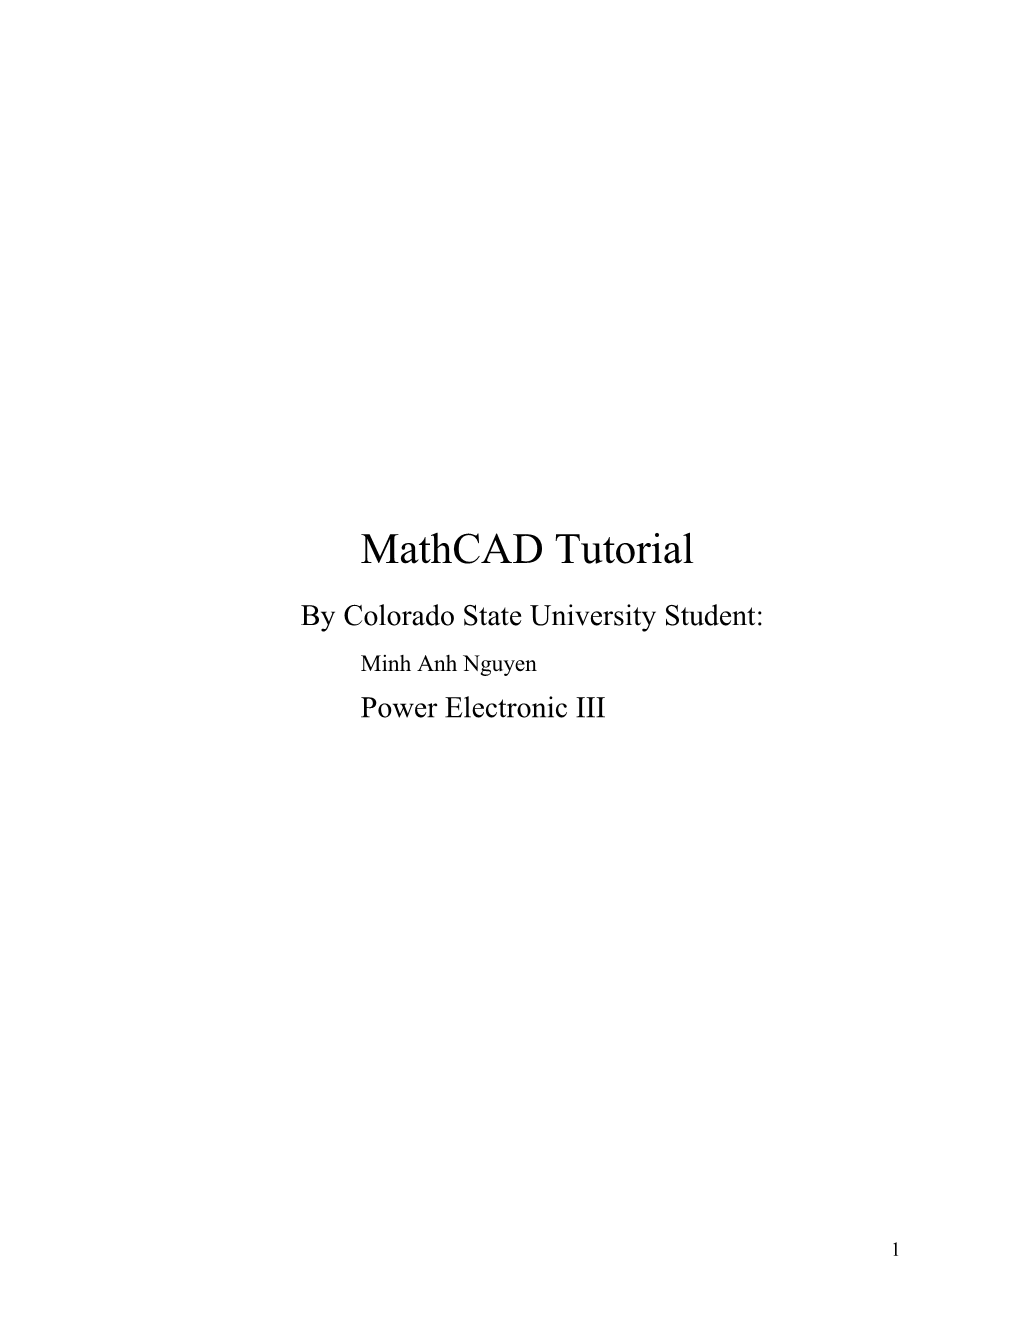 Mathcad Tutorial by Colorado State University Student: Minh Anh Nguyen Power Electronic III